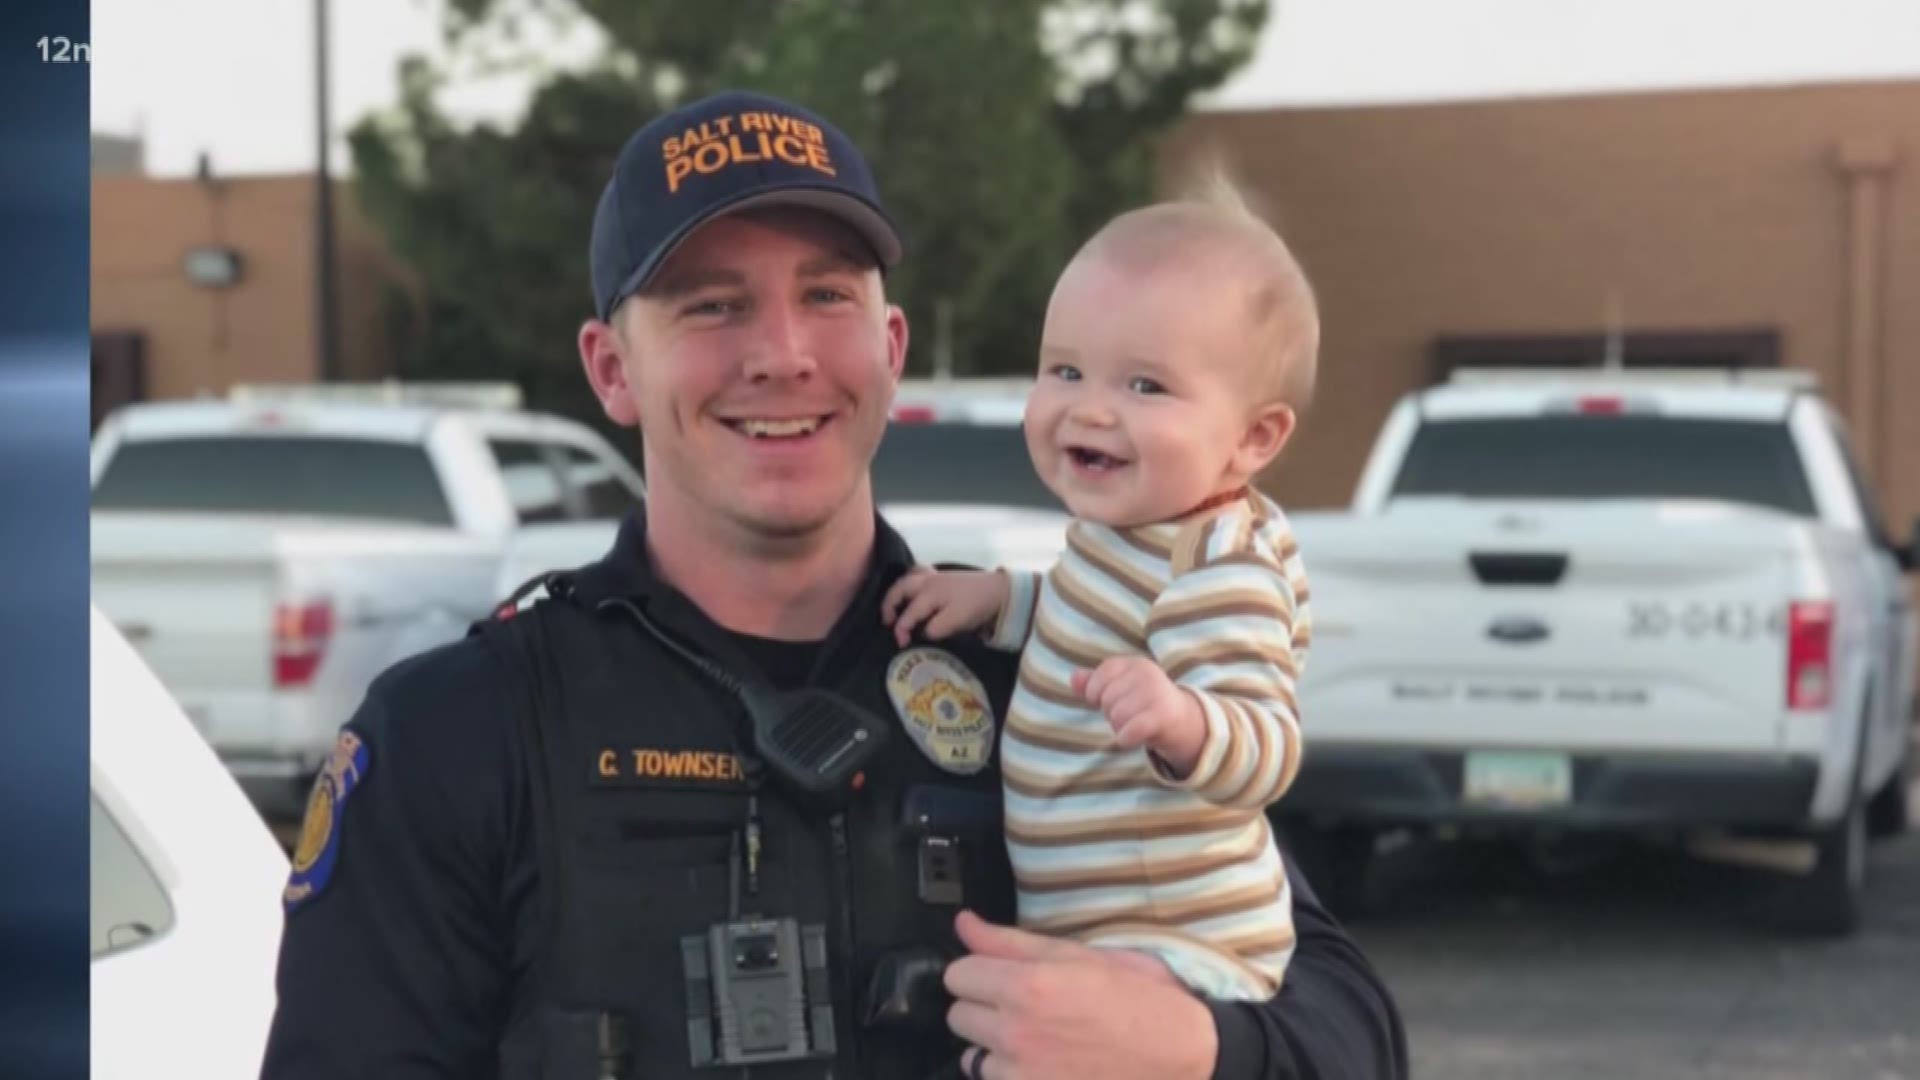 Officer Clayton Townsend was hit and killed by a distracted driver while he was making a traffic stop in early January. Today, Townsend's widow and family spoke out to support a bill that would ban texting and driving in Arizona.